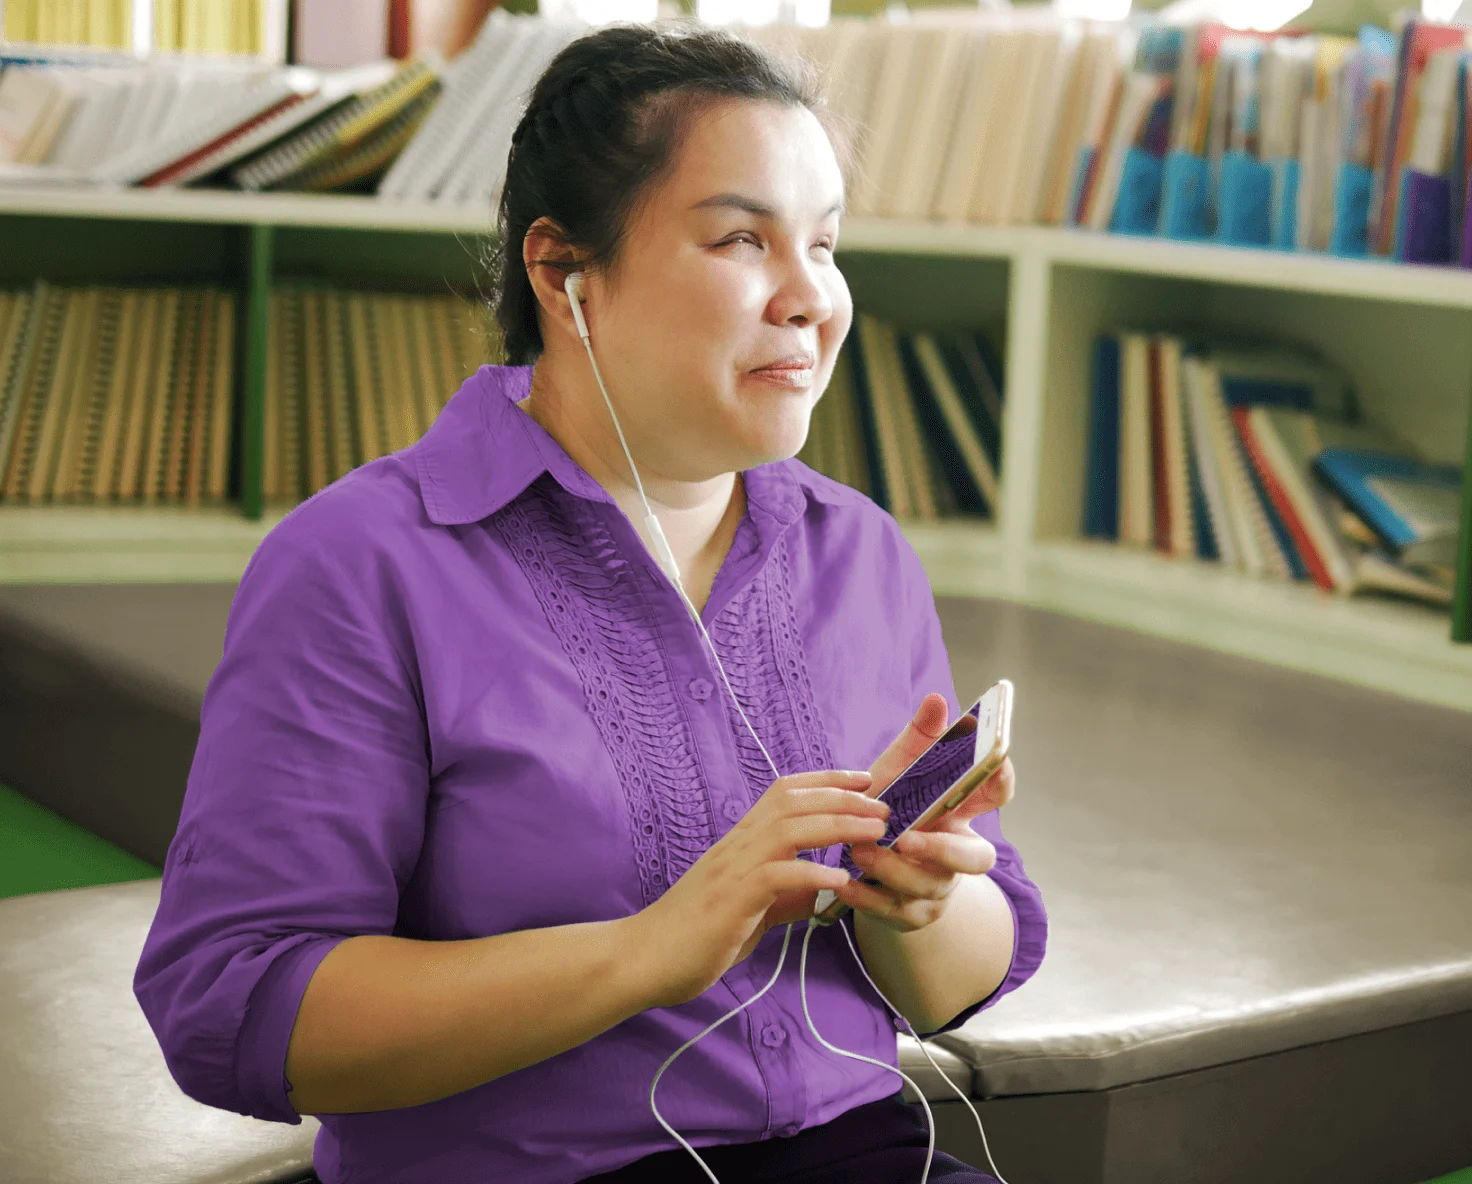 A person wearing headphones plugged into a smartphone